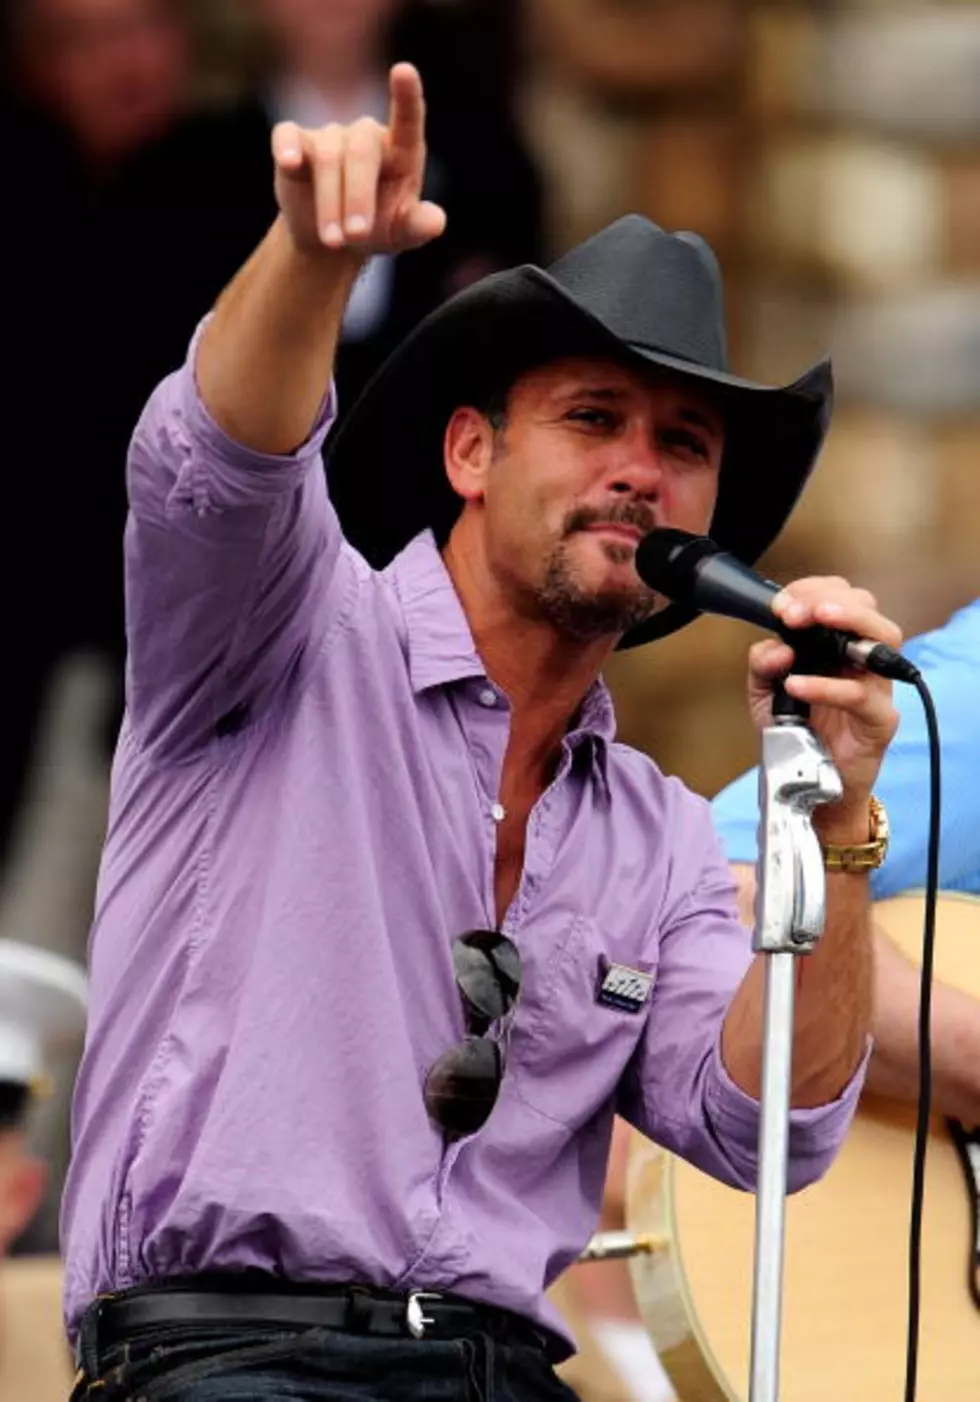 Tim McGraw’s New Song Battles Brantley Gilbert On Today’s Clash [AUDIO]